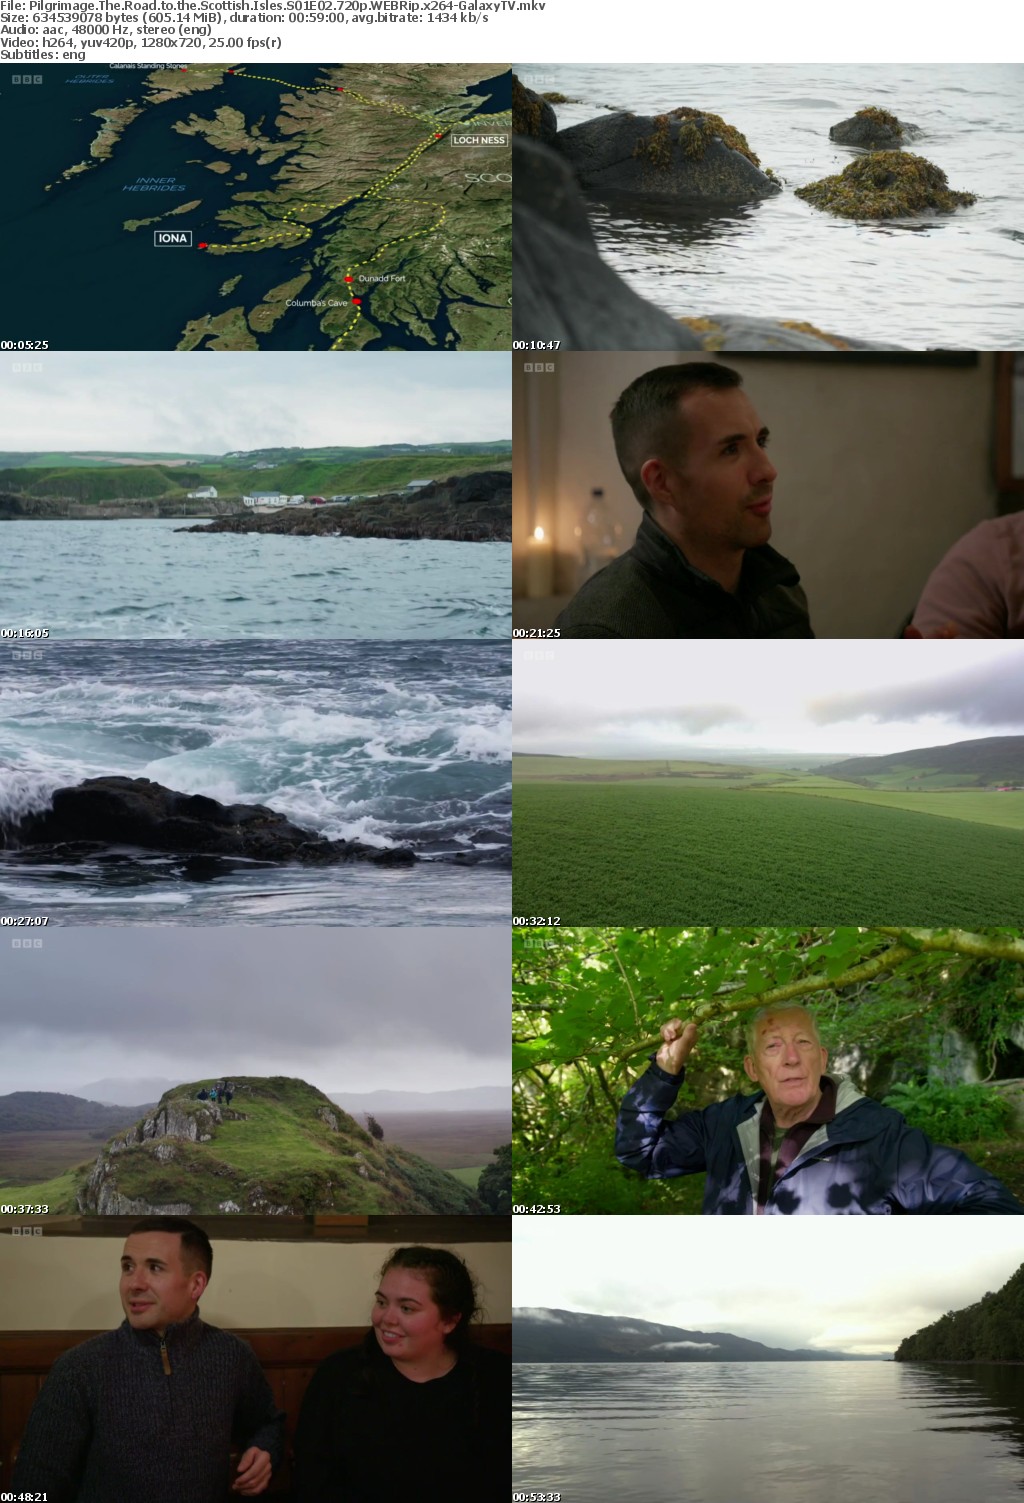 Pilgrimage The Road to the Scottish Isles S01 COMPLETE 720p WEBRip x264-GalaxyTV